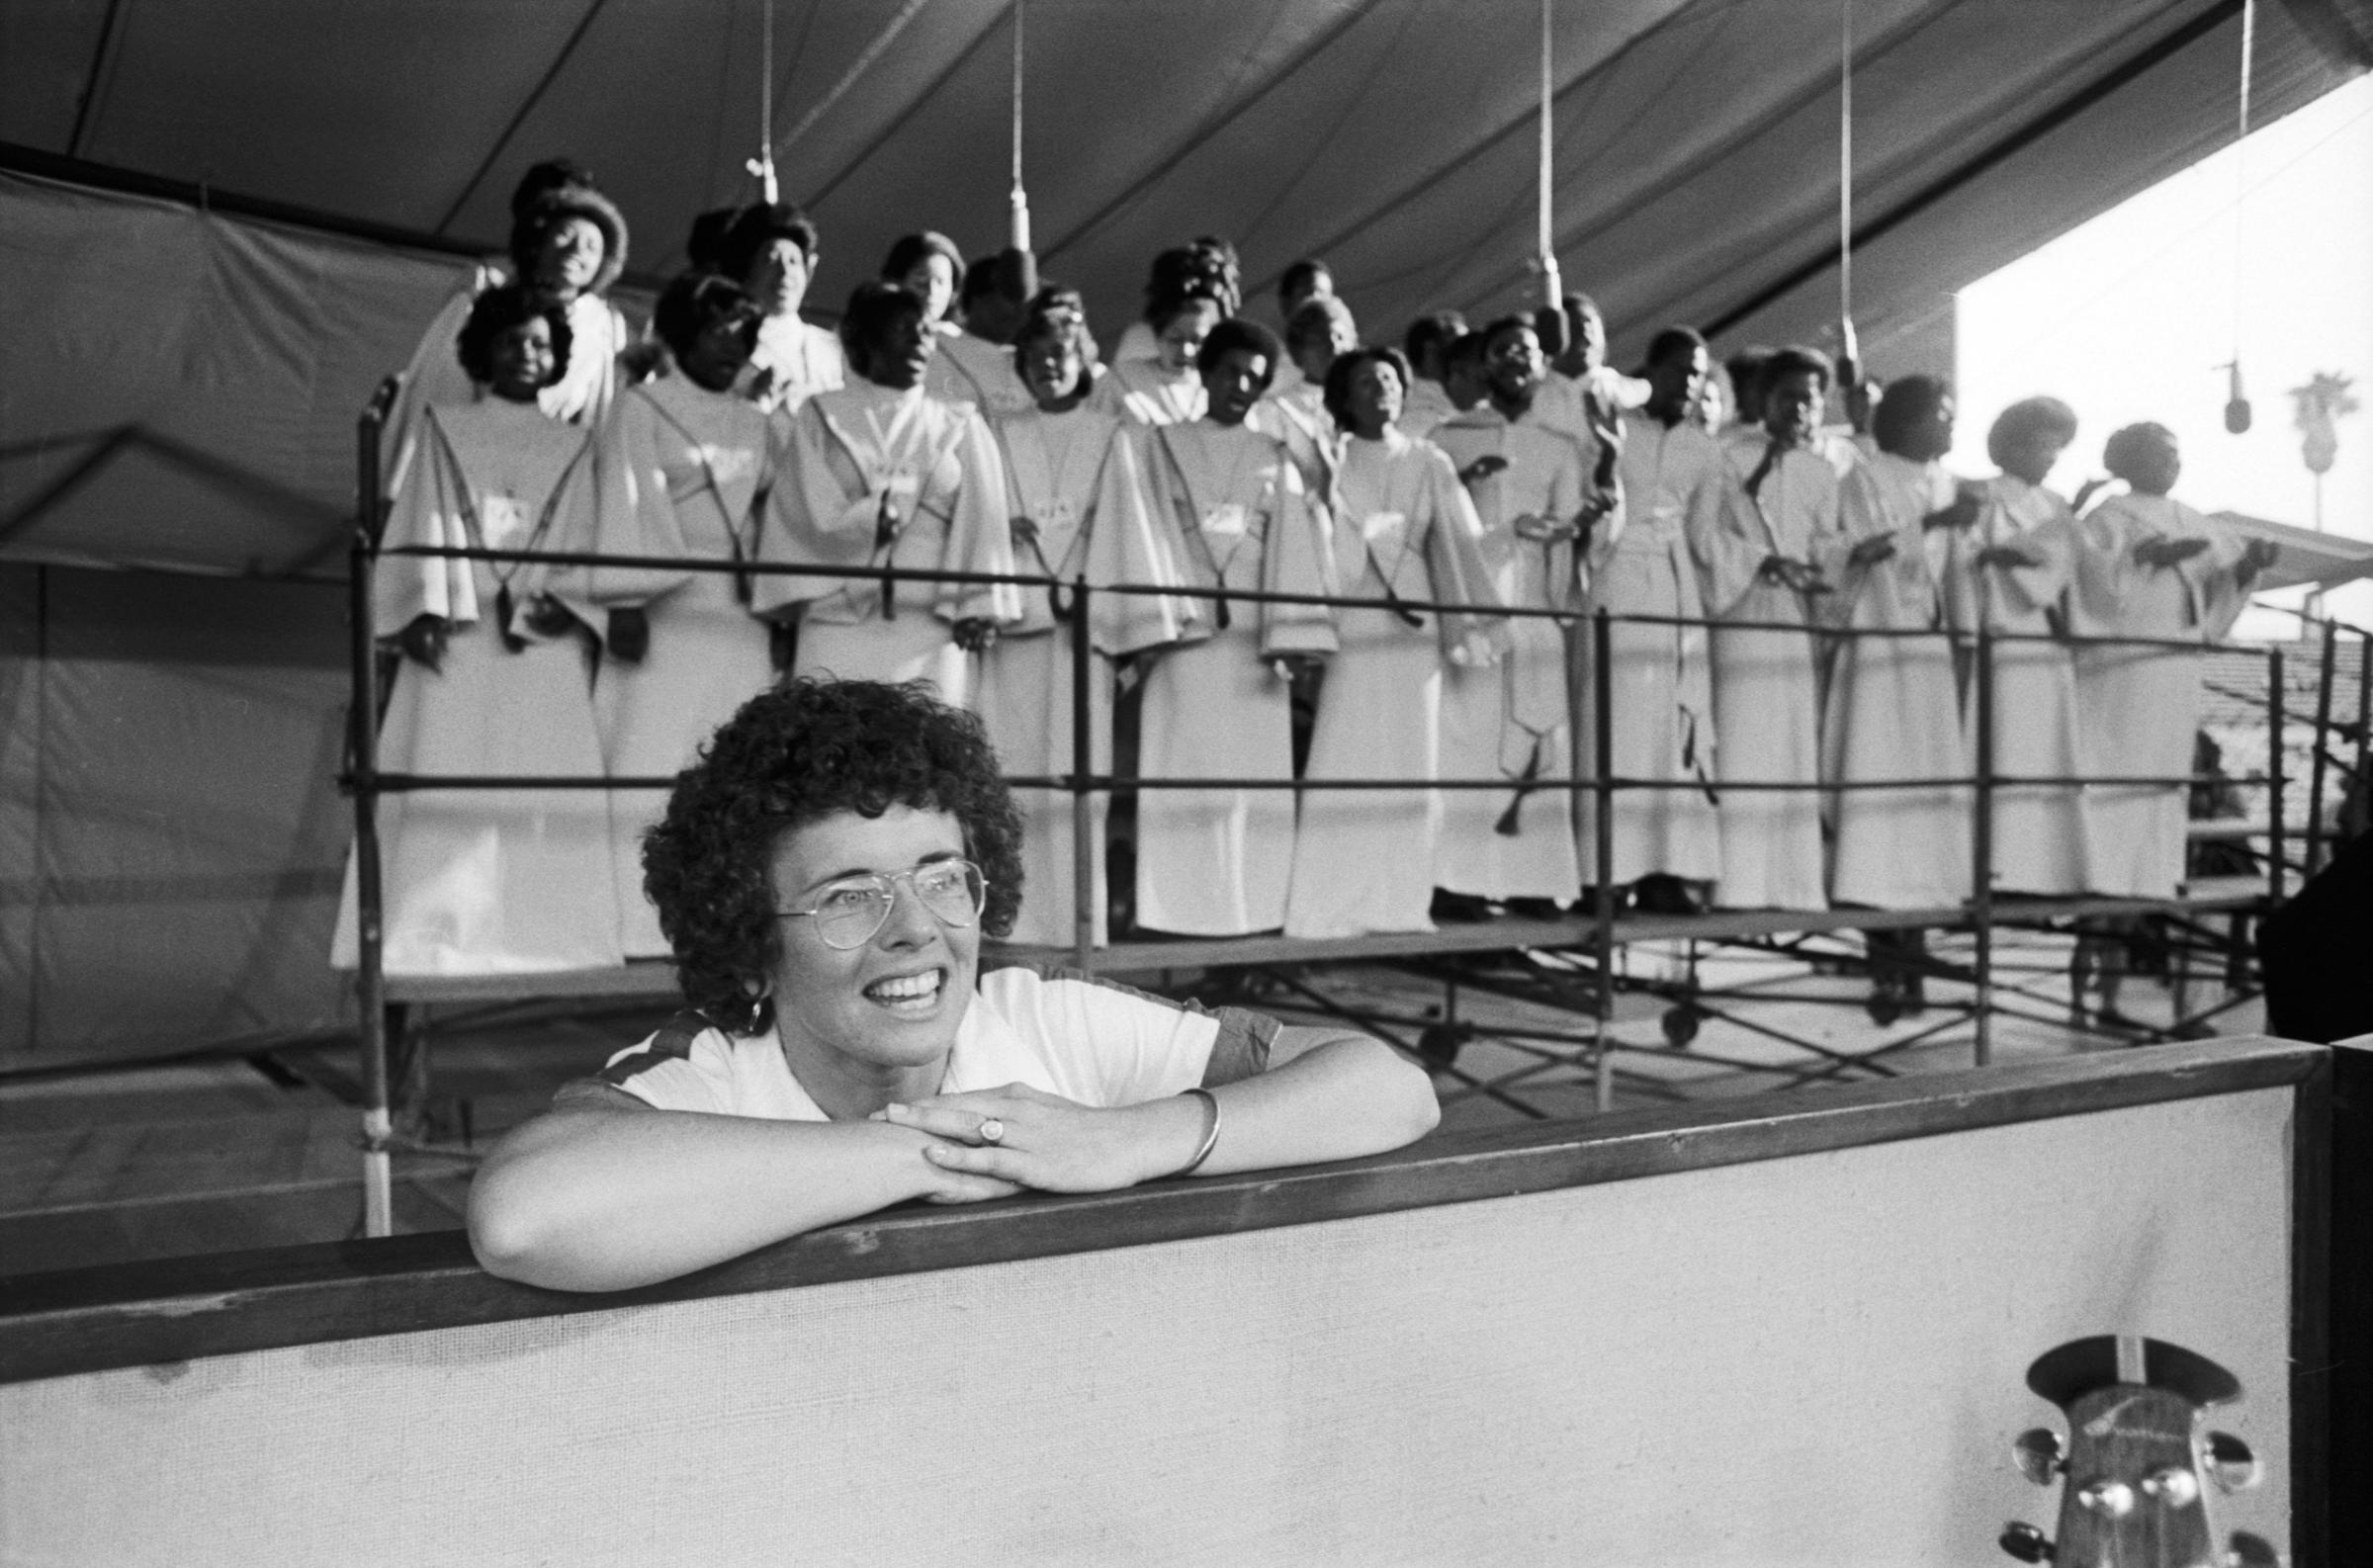 Billie Jean King stands in front of the 45-member James Cleveland Choir, who joined Elton onstage for several songs.